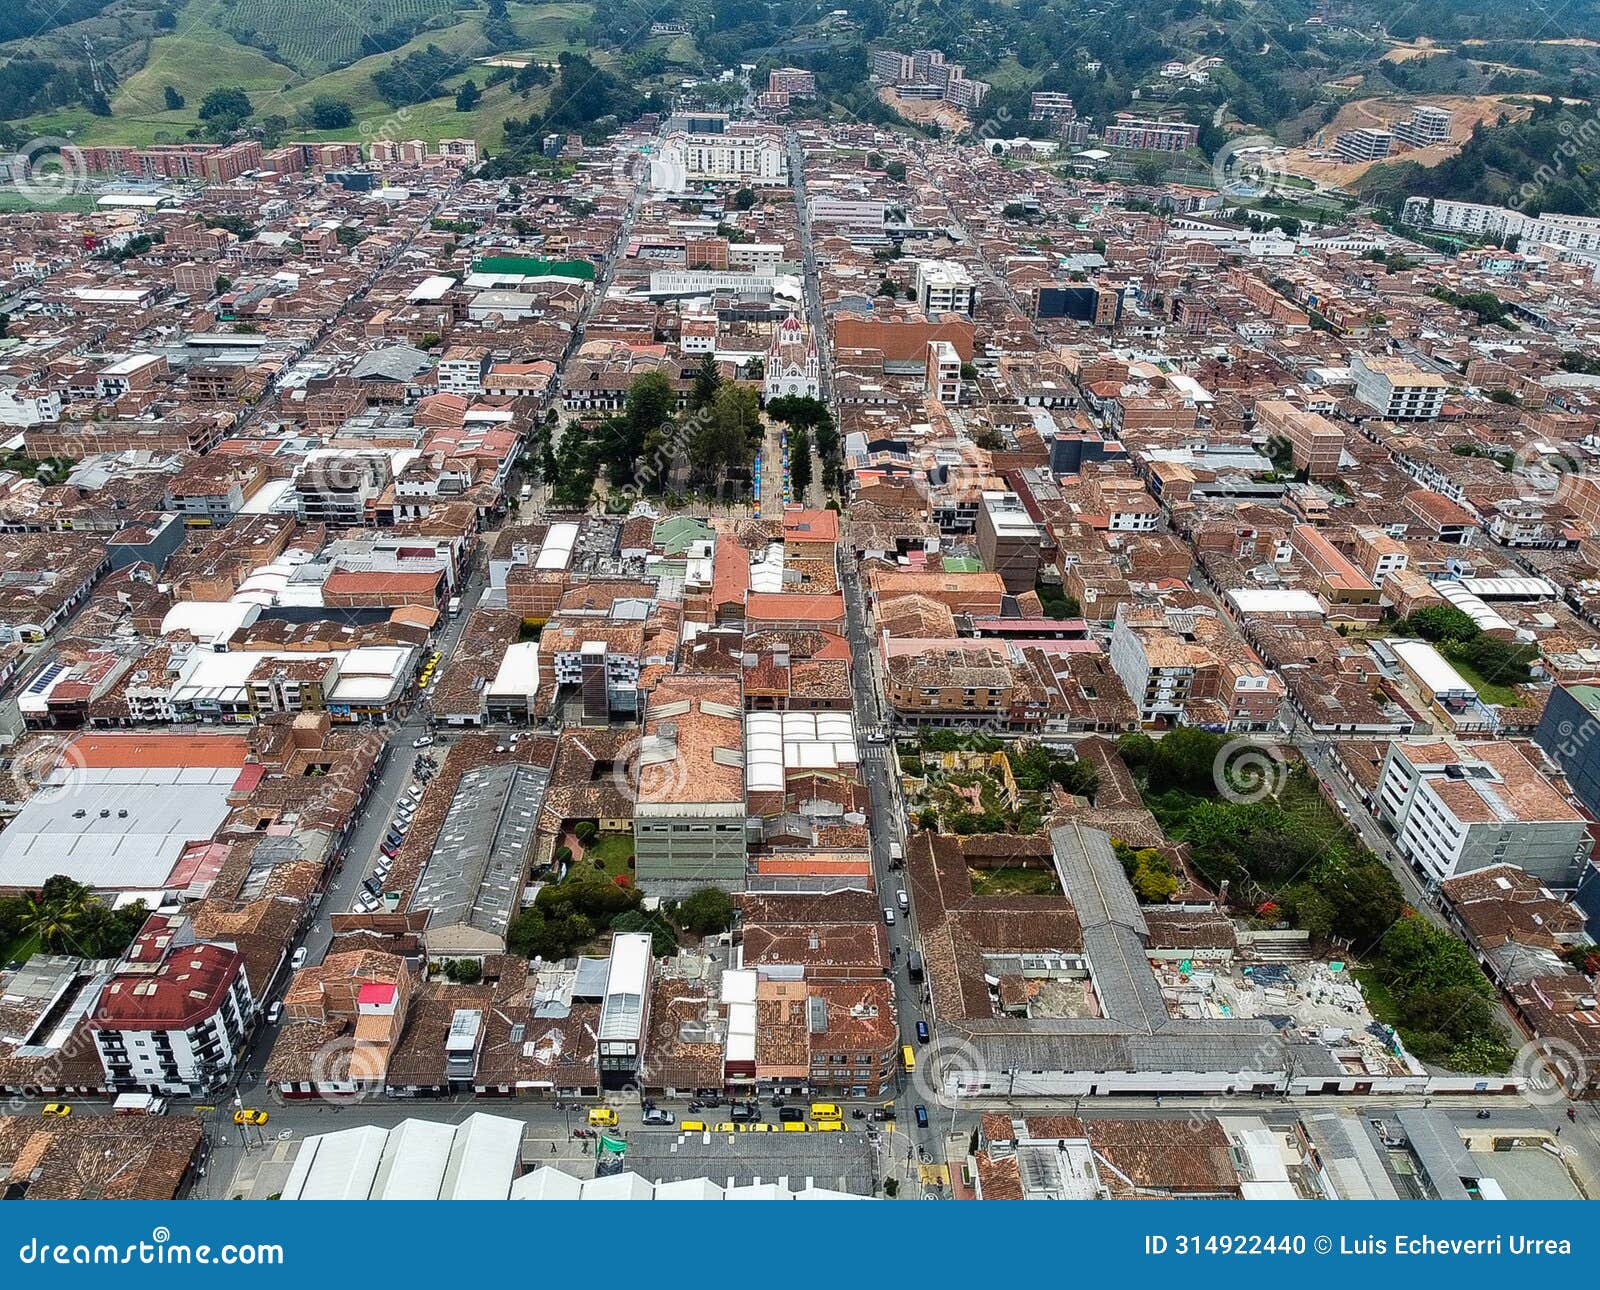 la ceja, antioquia - colombia. march 9, 2024. it is a colombian municipality located in the east of the department